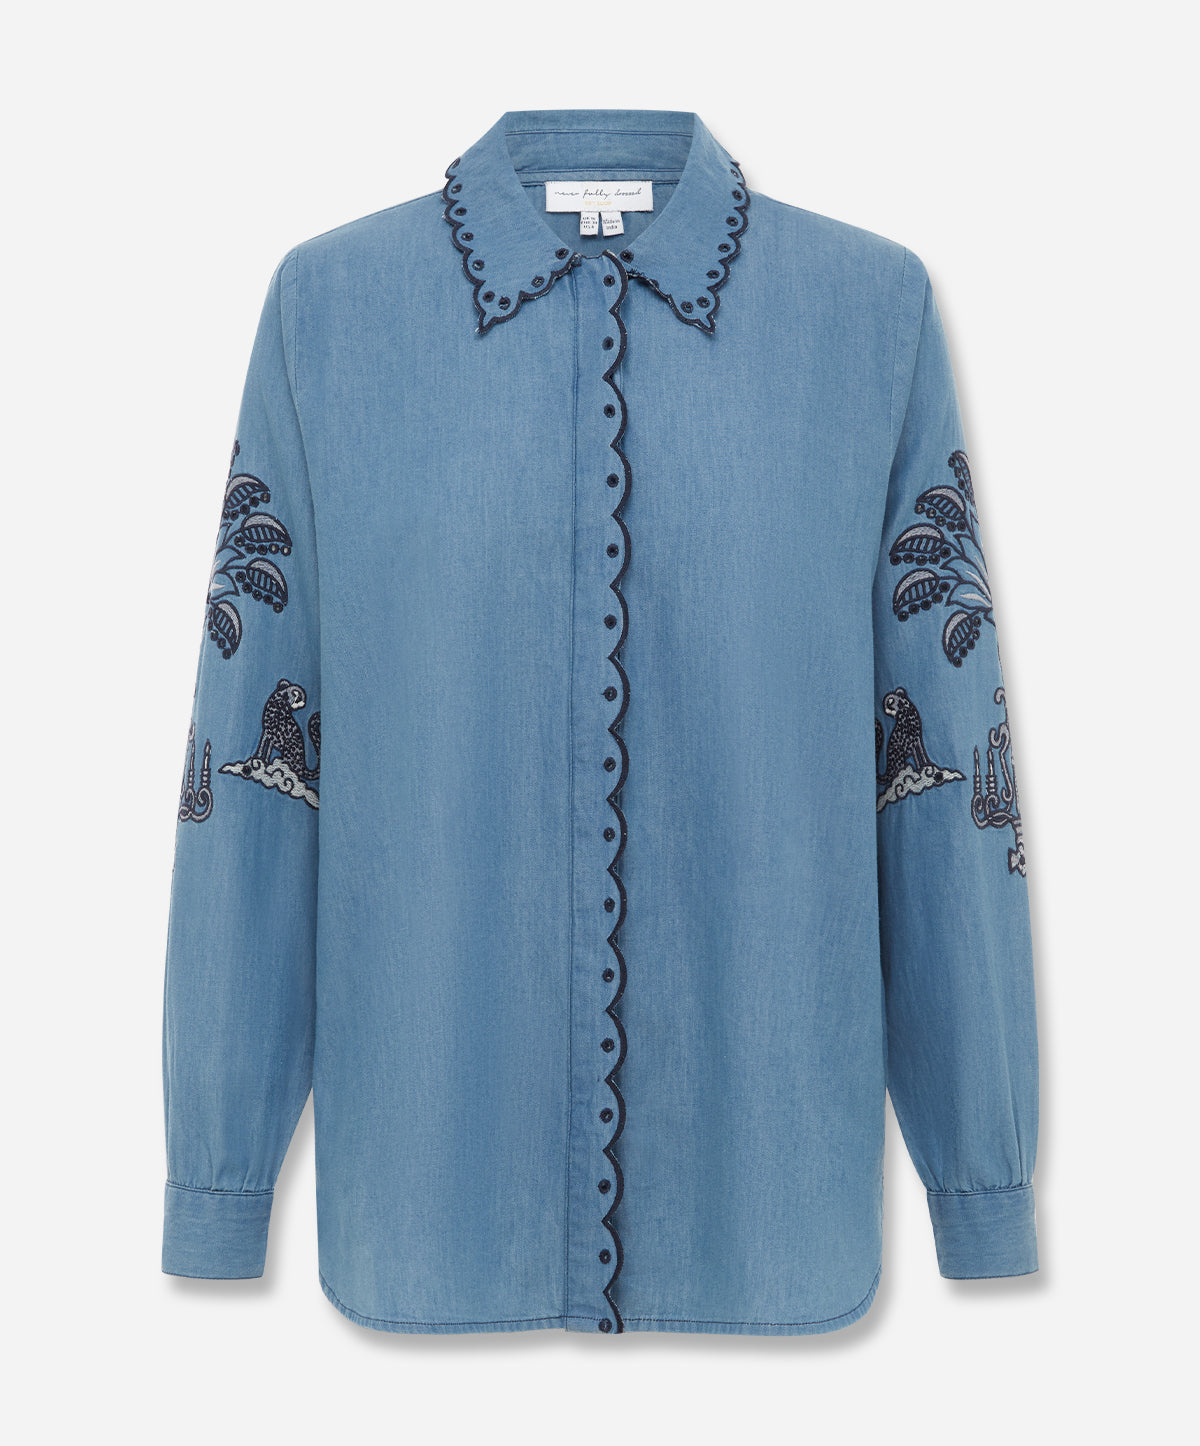 Dreaming in the Clouds Denim Shirt